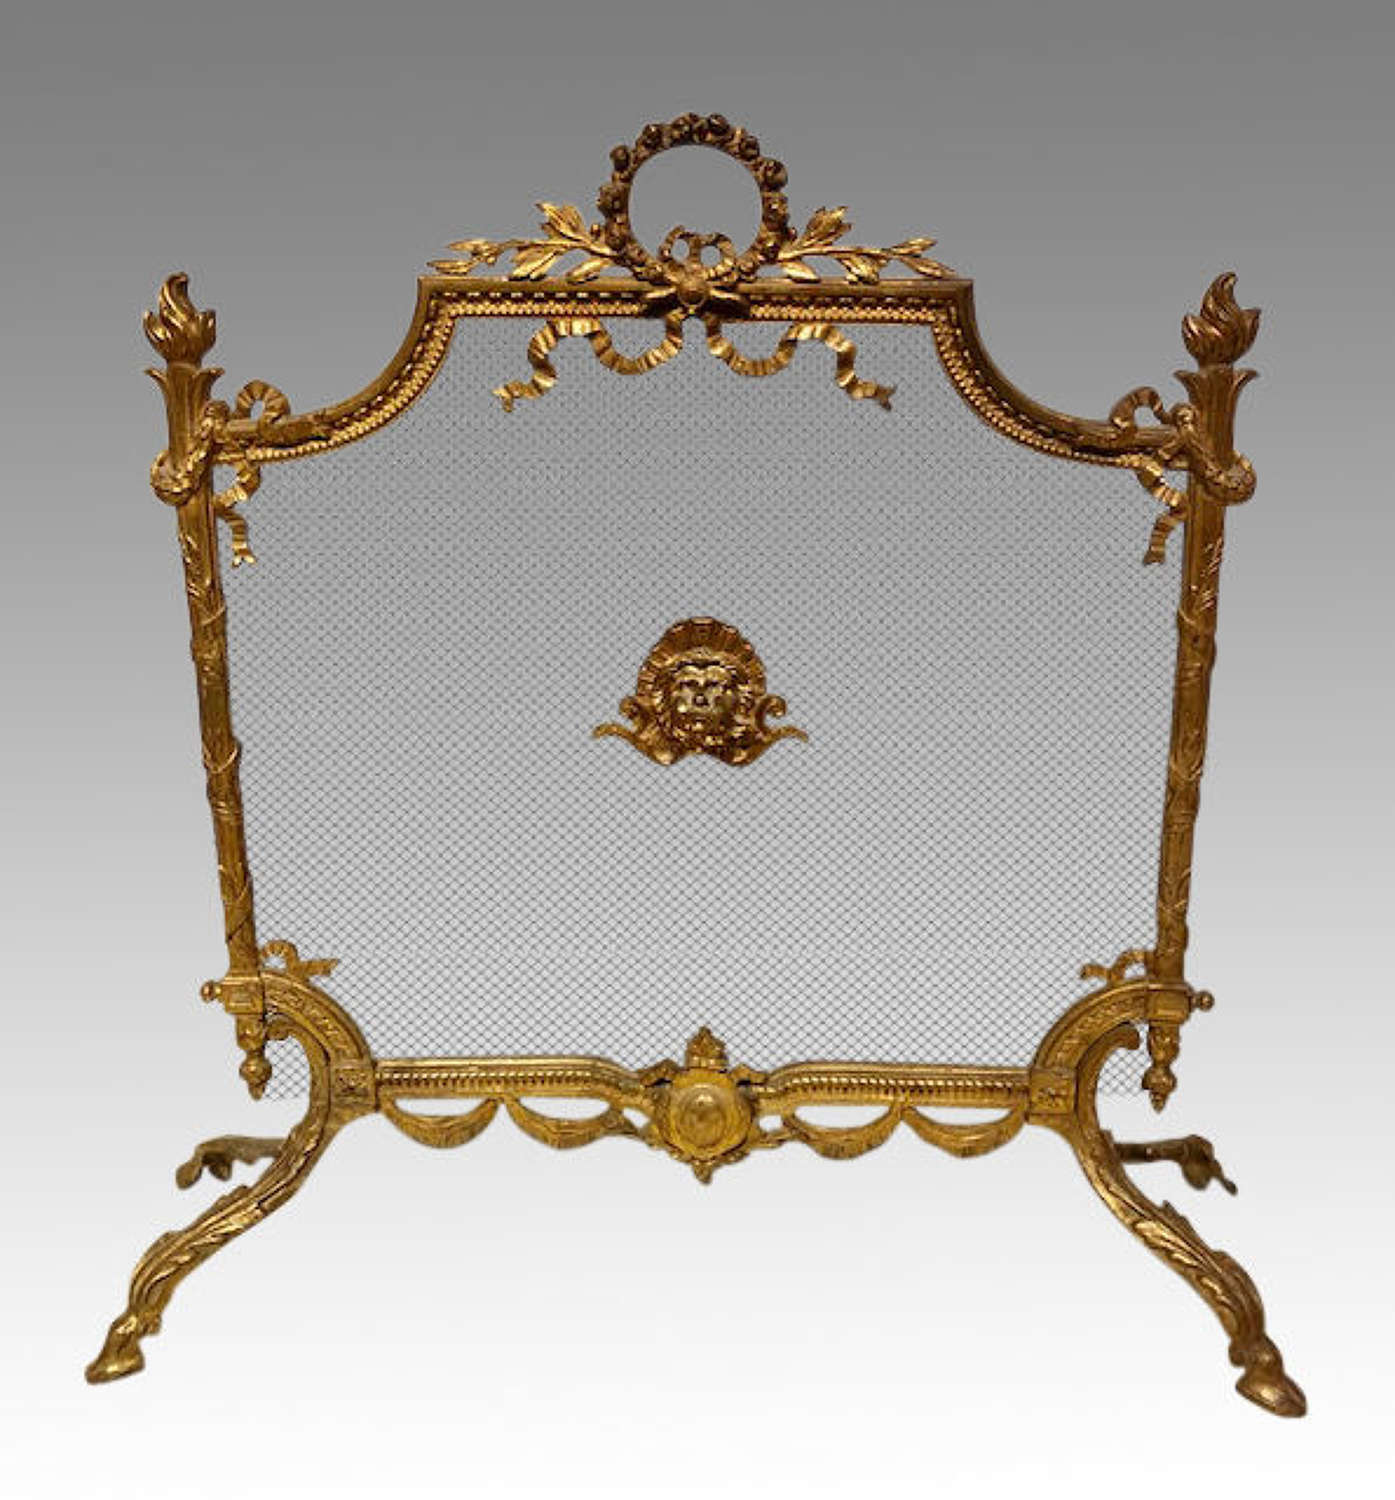 Antique French ormolu fireguard in the Rococo style.